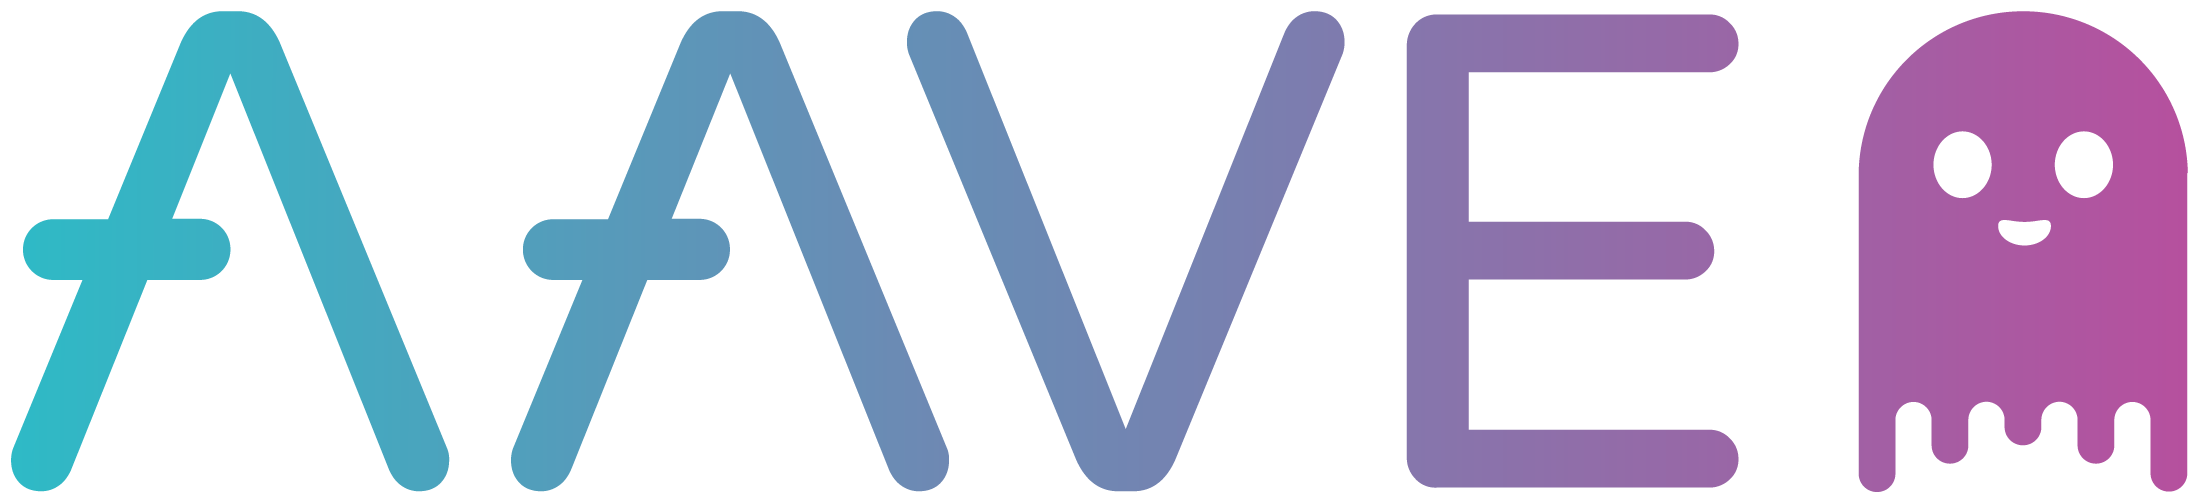 Aave logo colors